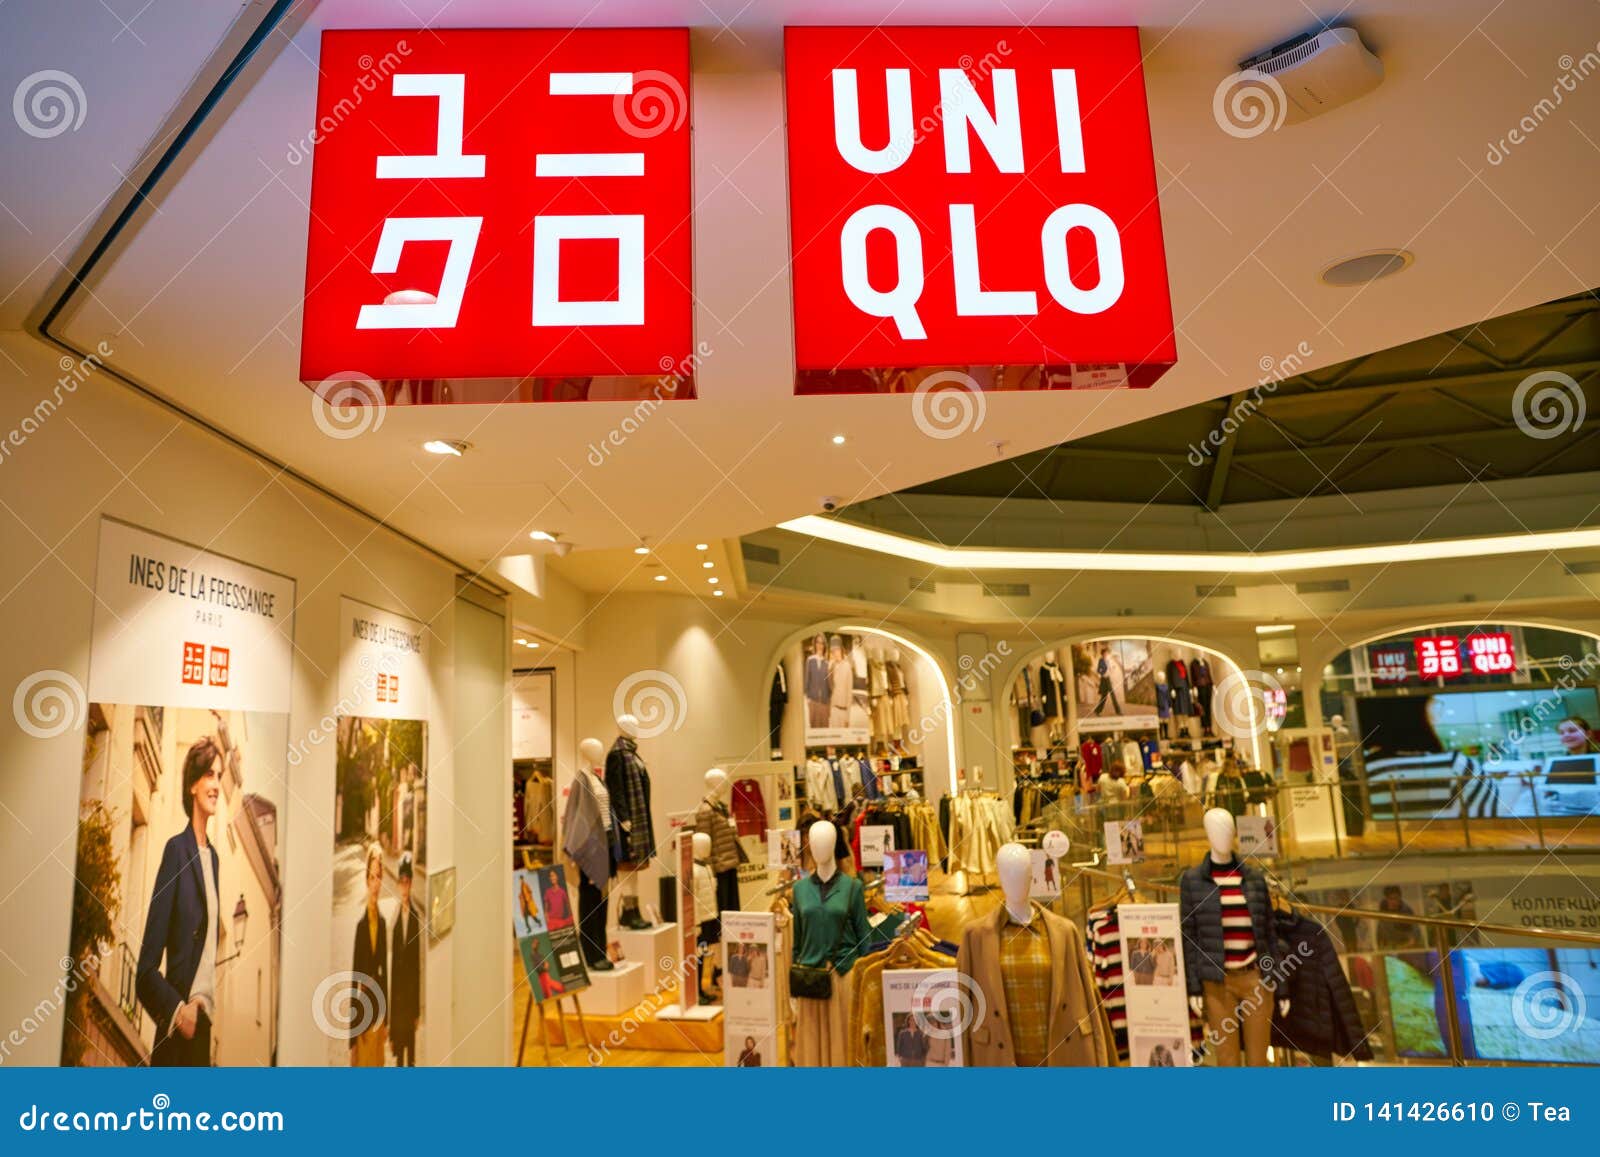 Uniqlo Australia to open five new shops across Australia including two in  Sydney and one in Adelaide